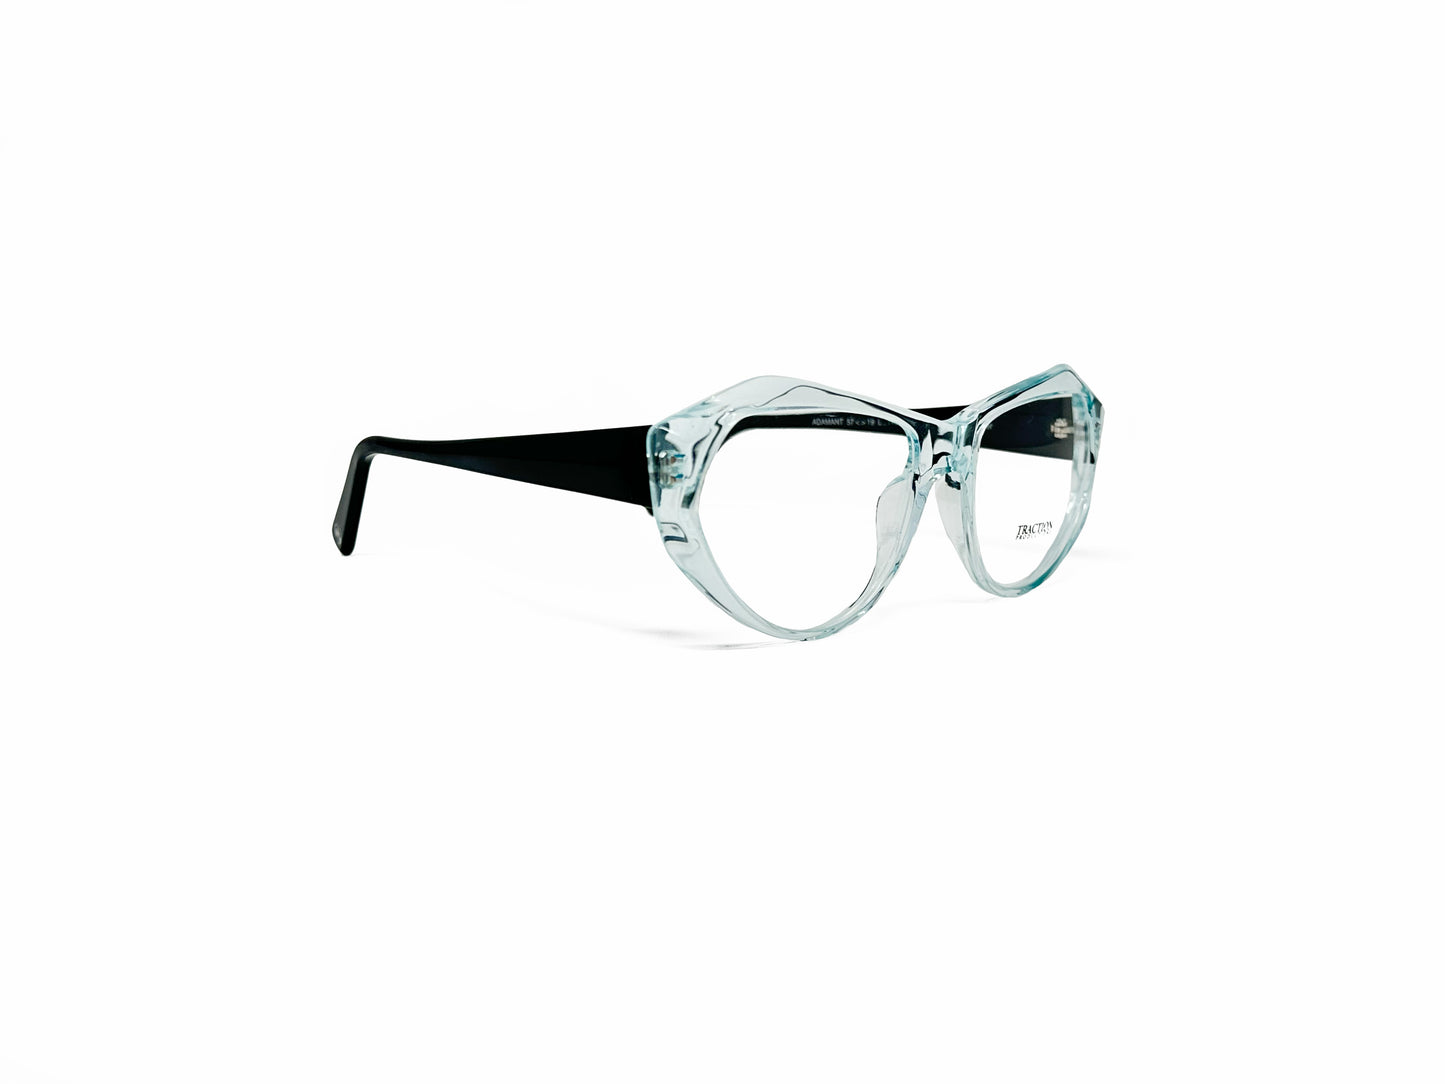 Traction geometric acetate optical frame. Model: Adamant. Color: Ether - Transparent Baby Blue. Side view.